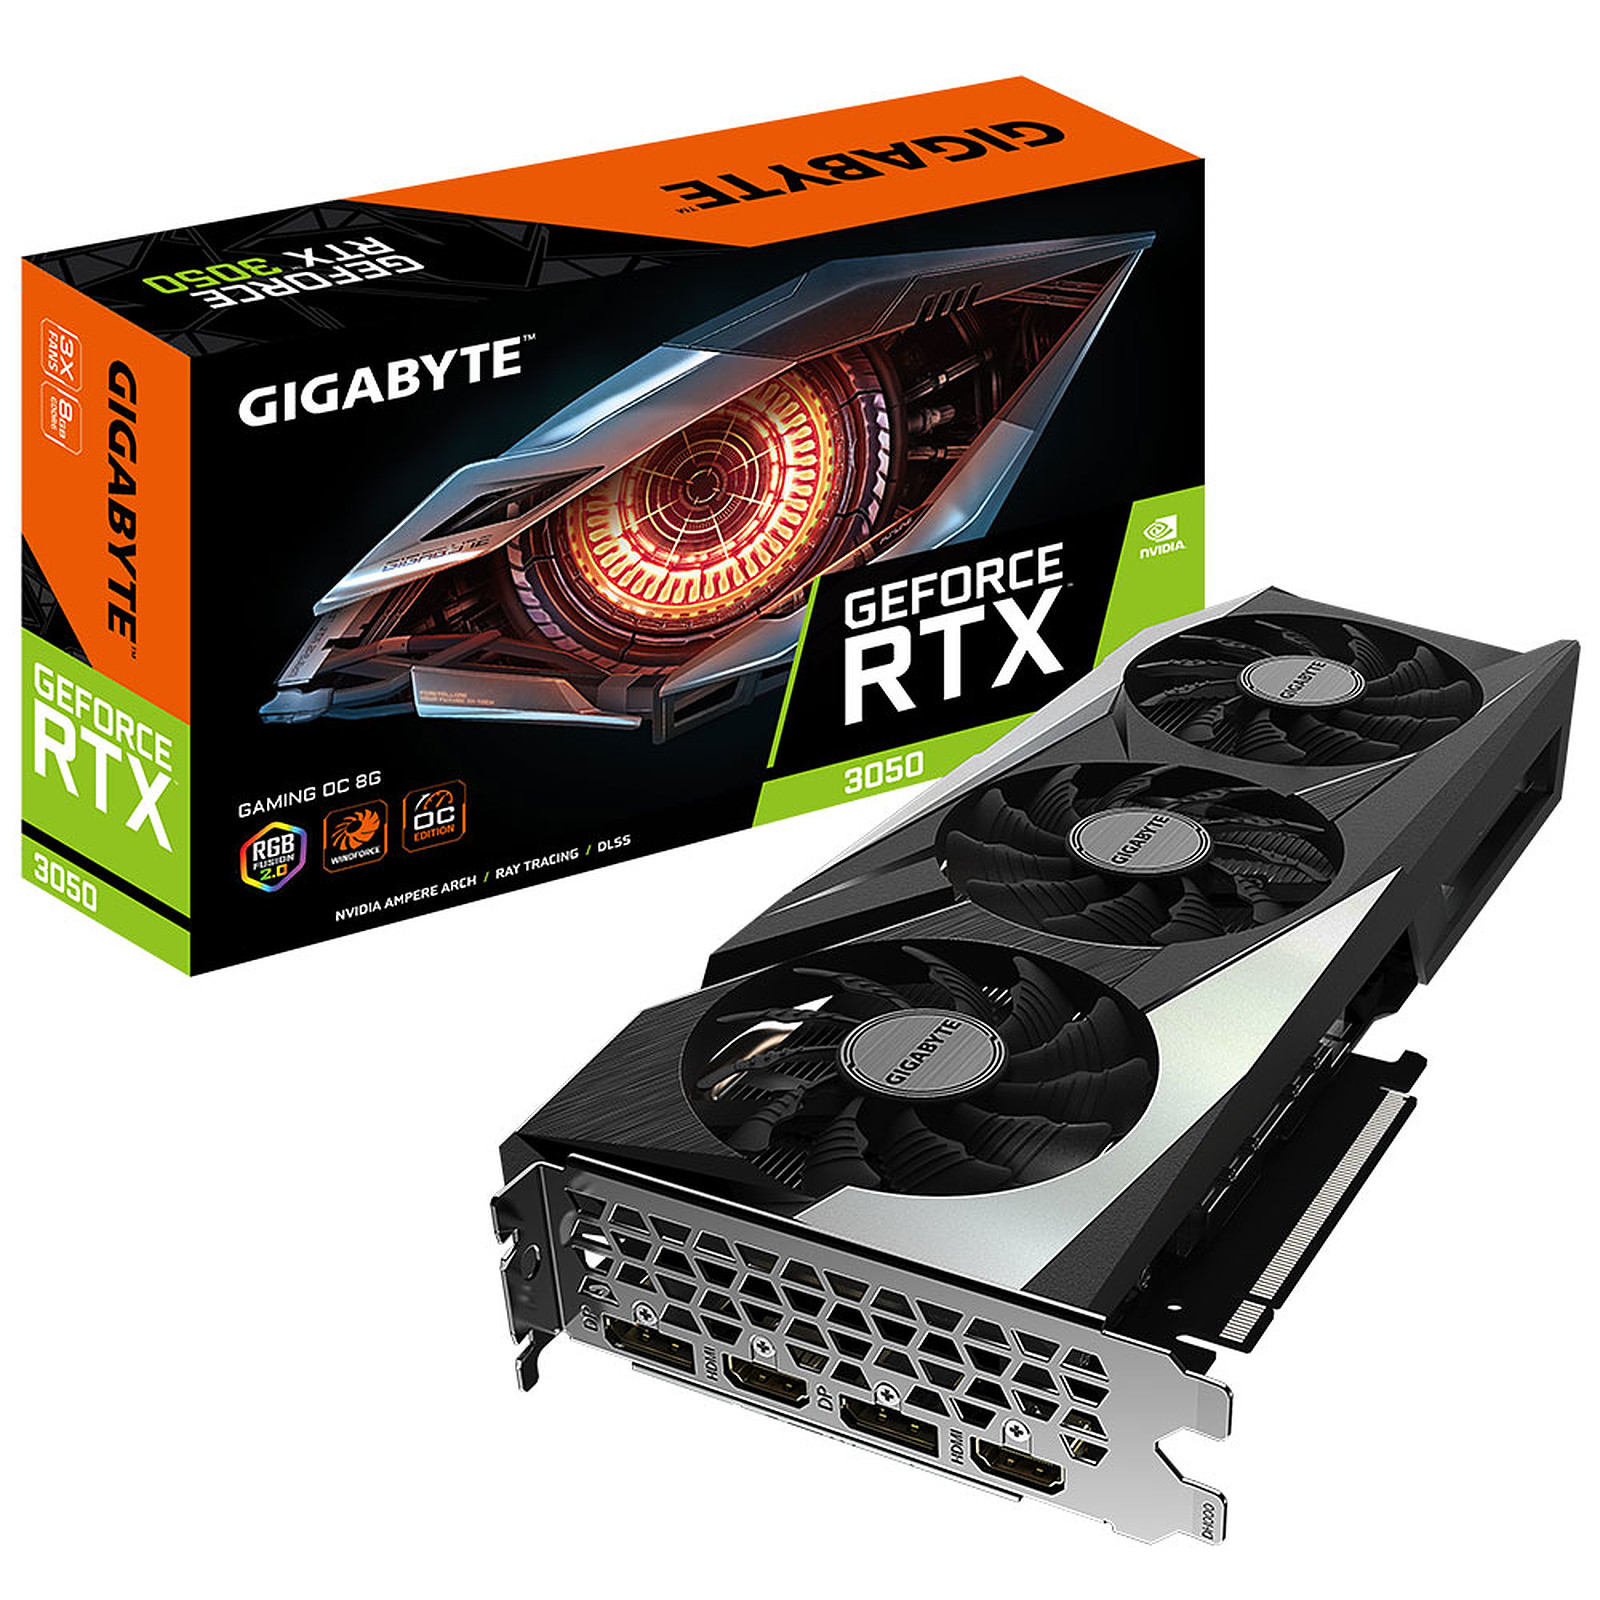 Expertise Ithaca Pub Placă video Gigabyte GeForce RTX 3050 Gaming OC | Xstore.md